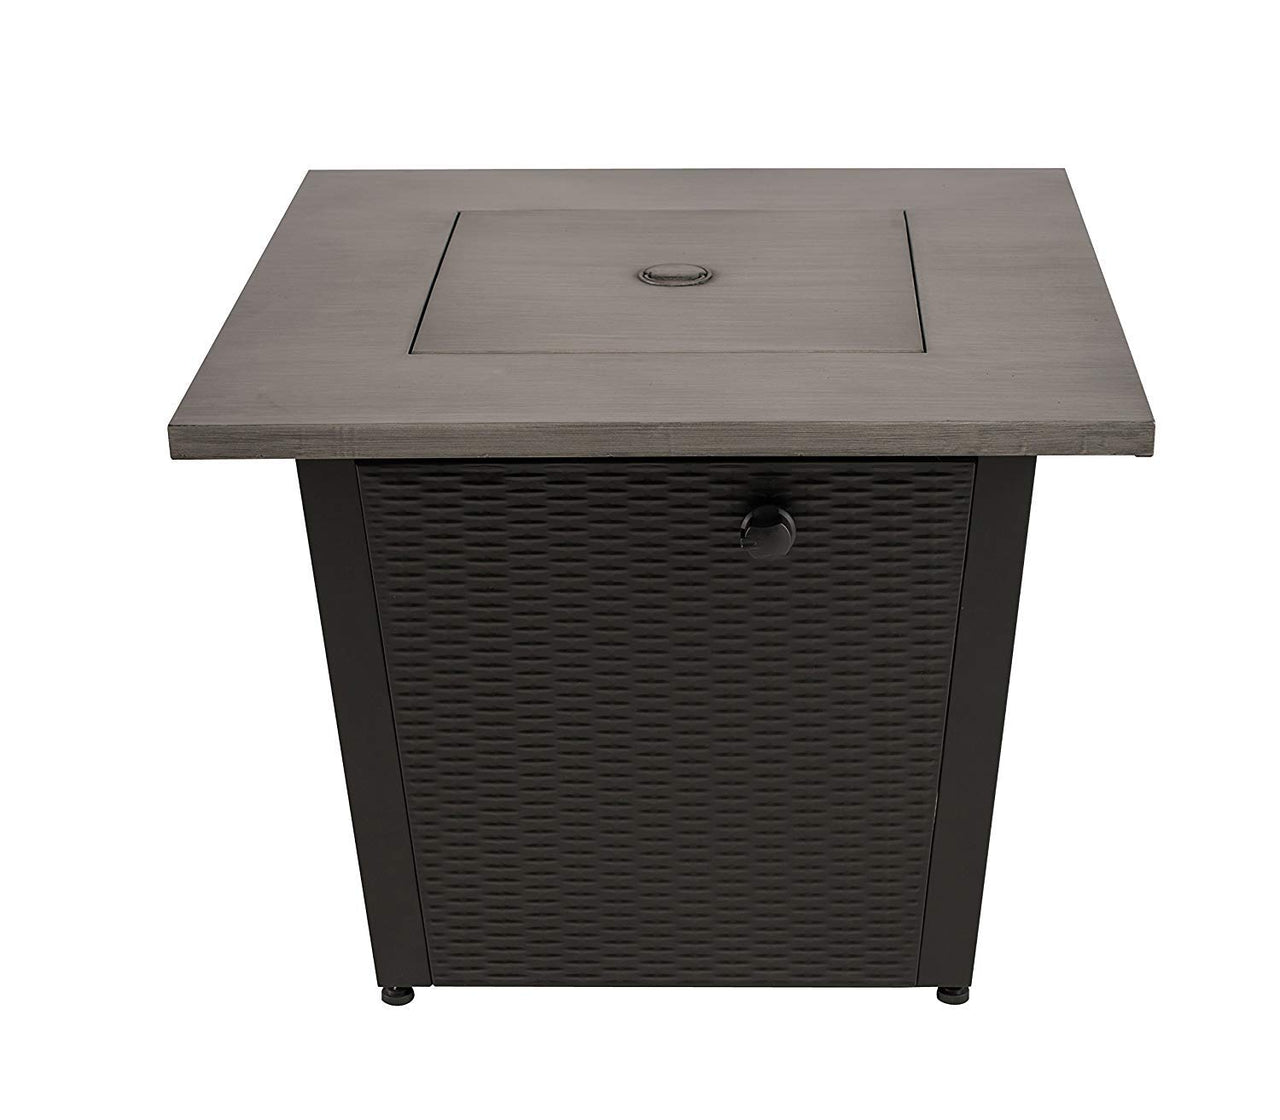 50,000 BTU 32inch Square Outdoor Propane Fire Pits Table, Gray Wood Grain Table Top with Lid, ETL Certification